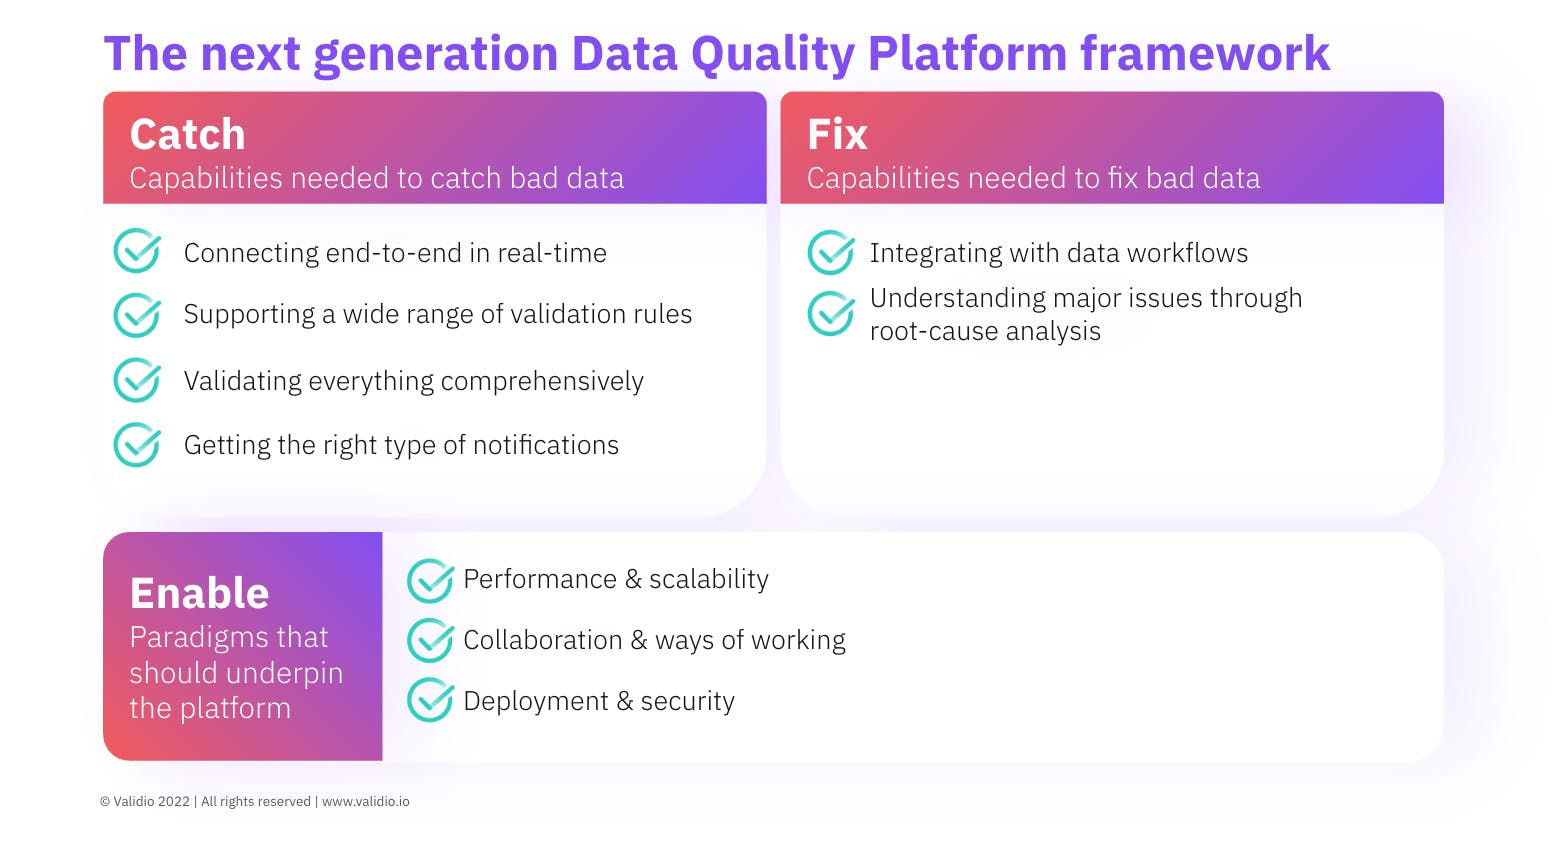 Core tenets of the next generation DQP, according to Validio